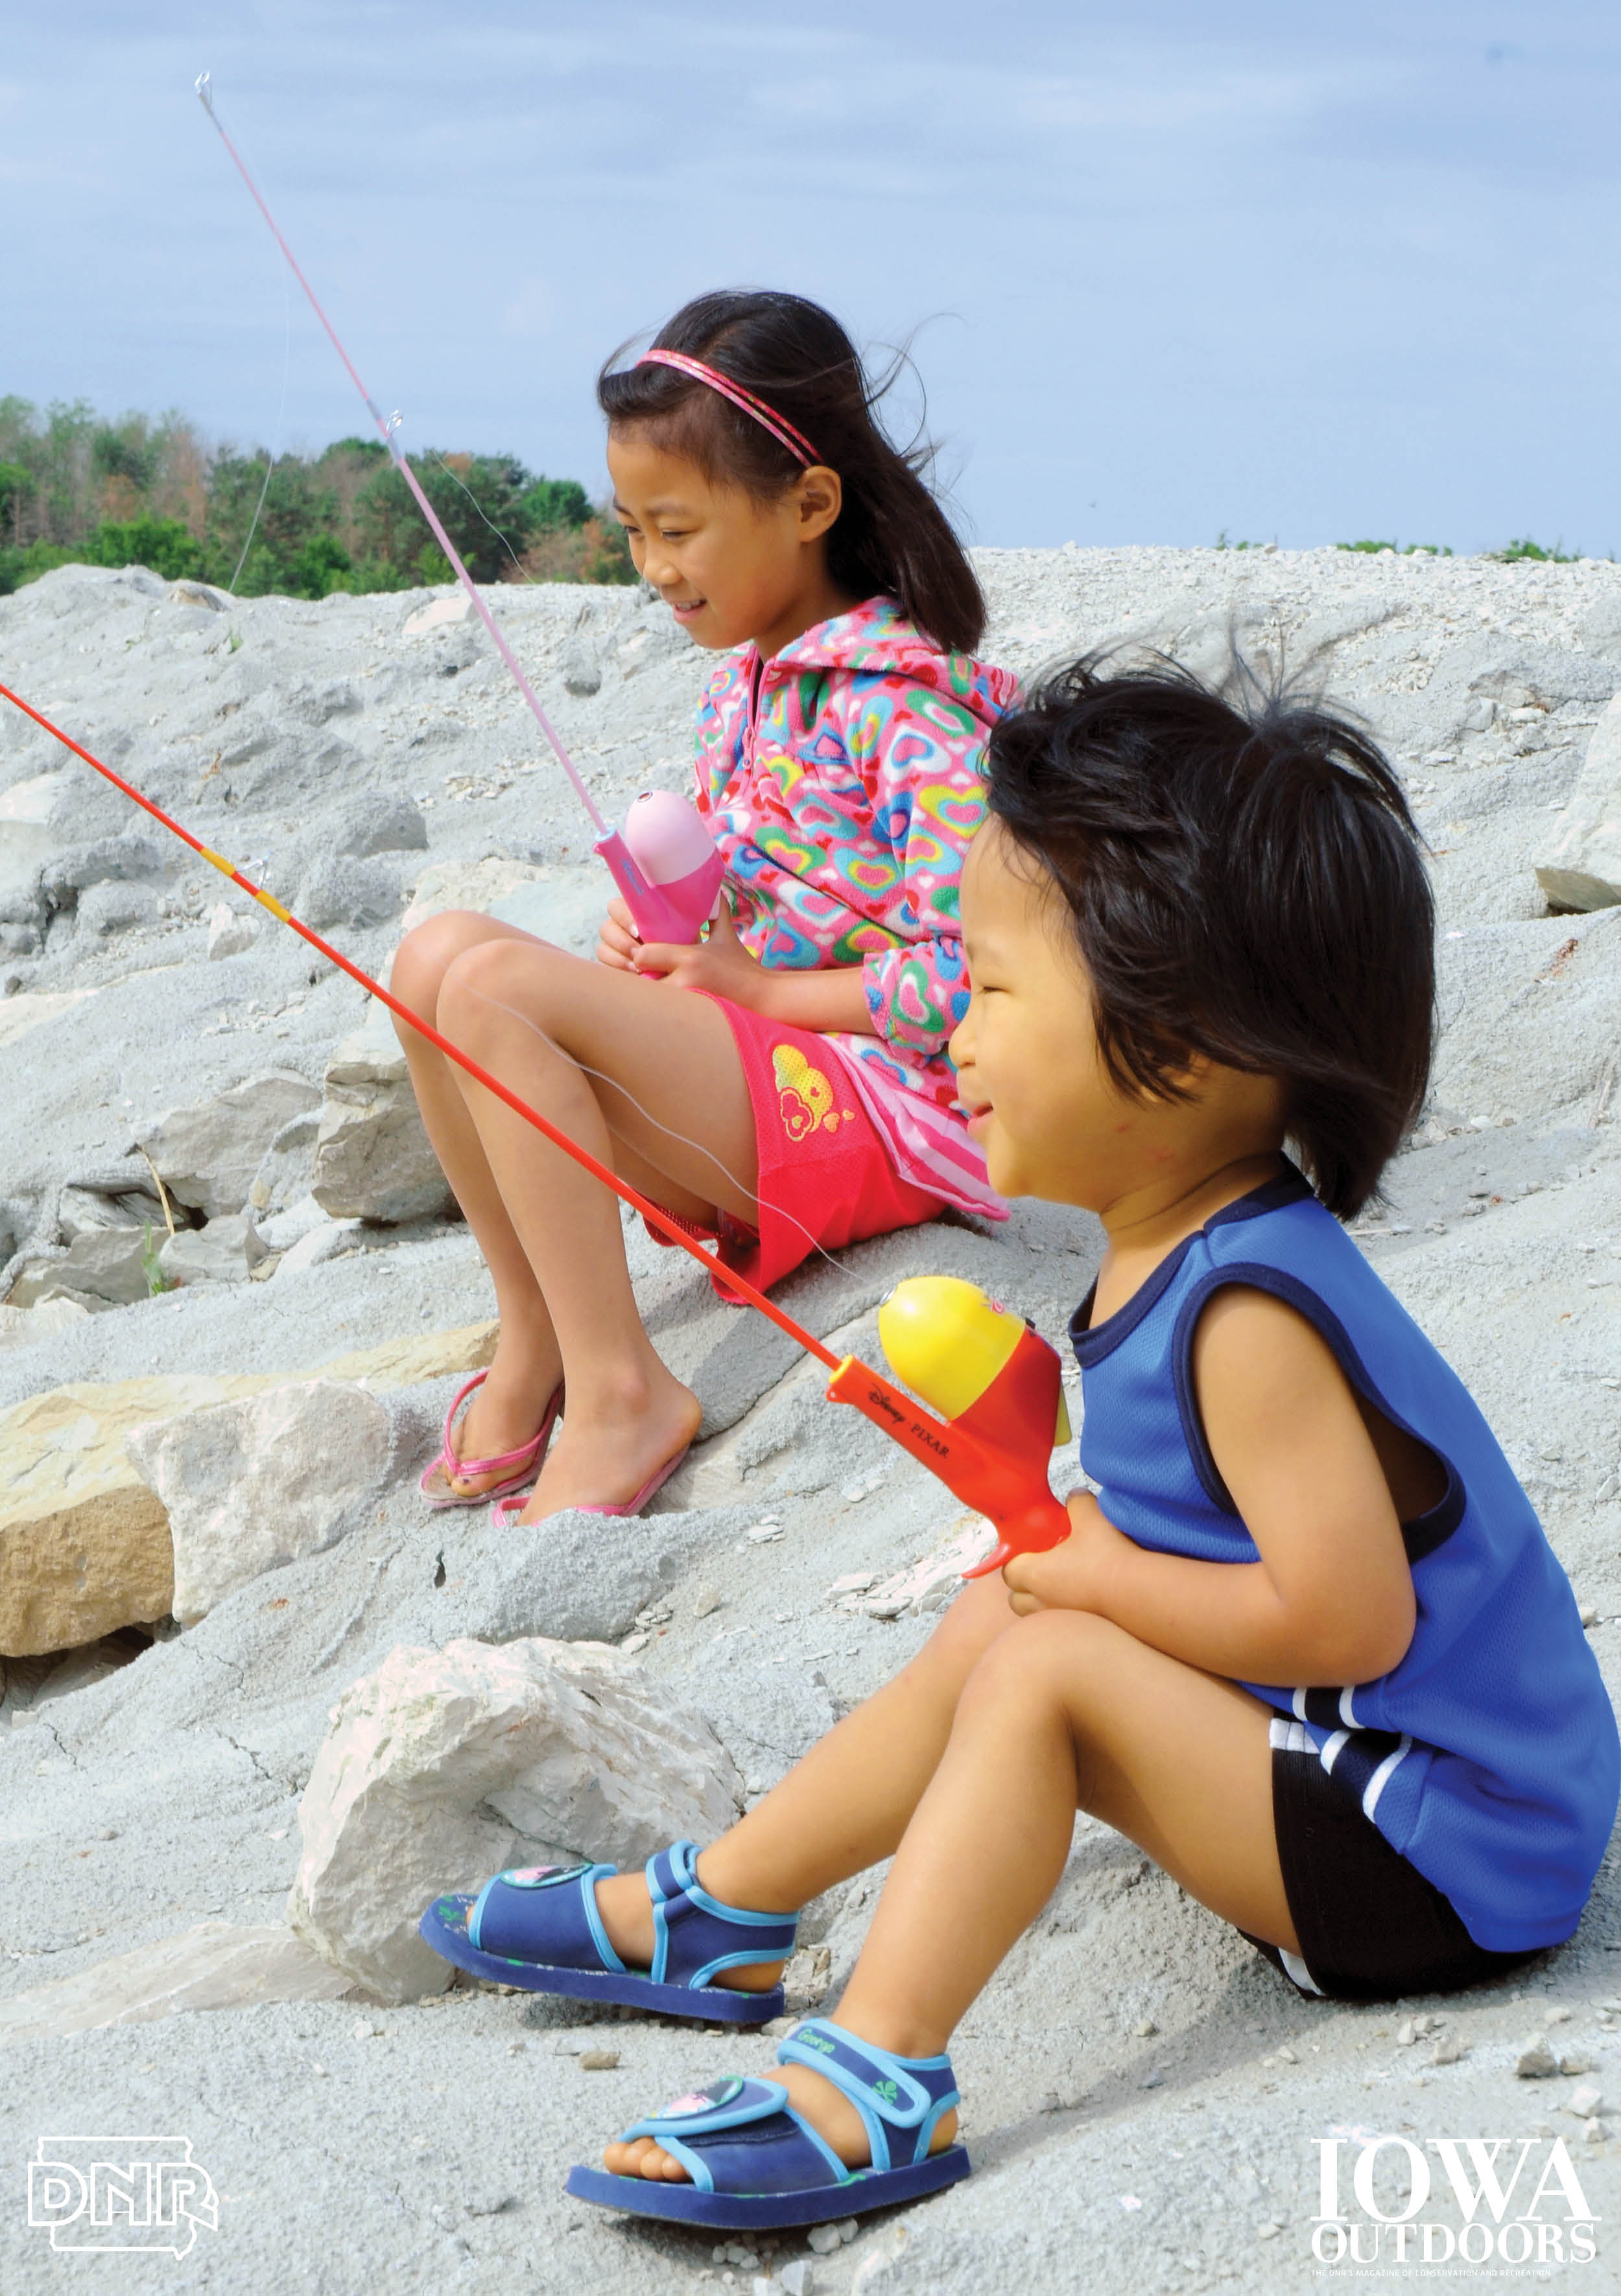 Take your kids to one of the top fishing spots in Des Moines for a fun day | Iowa DNR